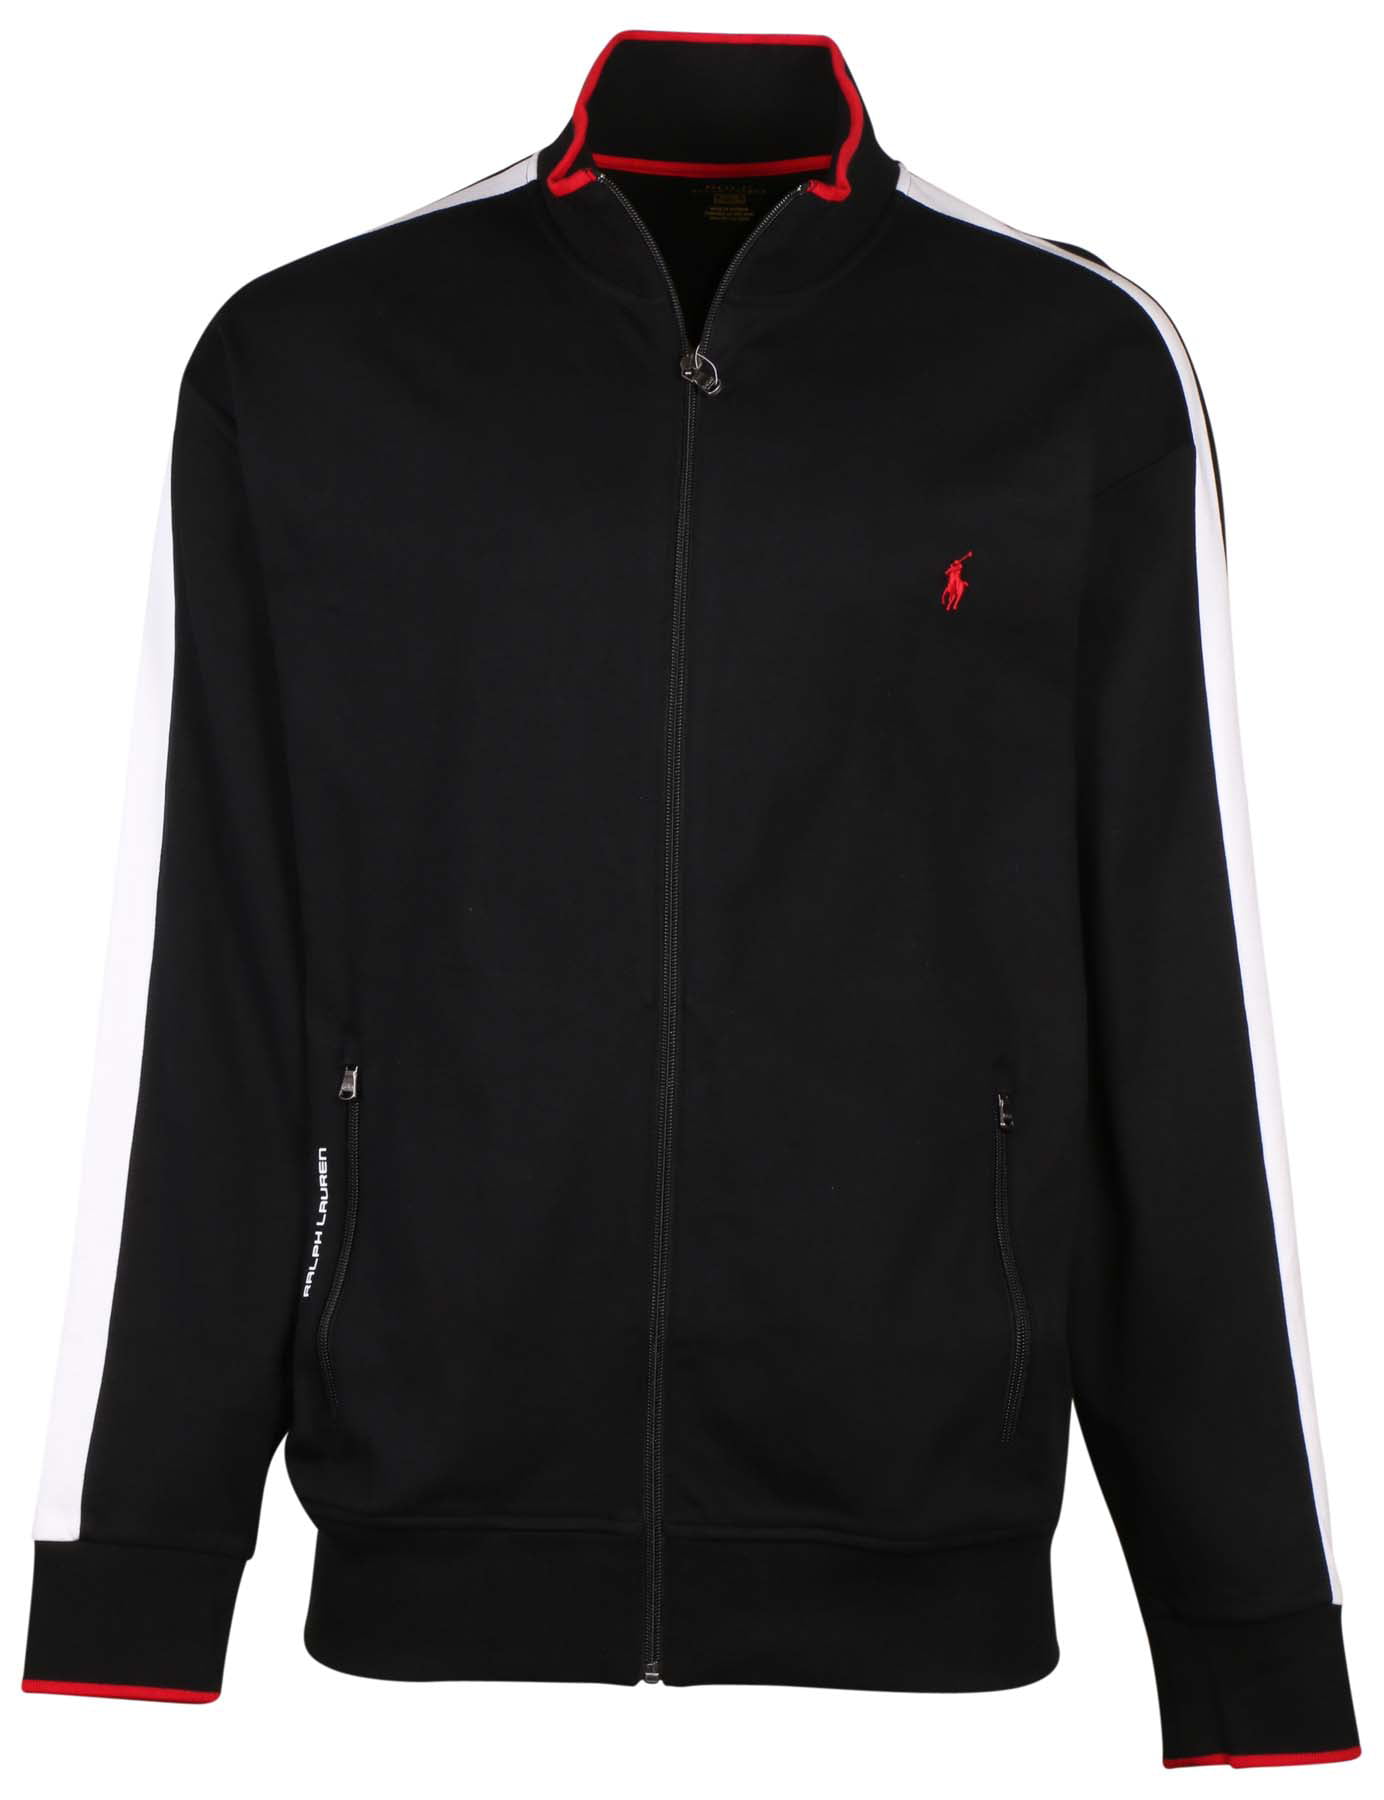 polo jacket black and red